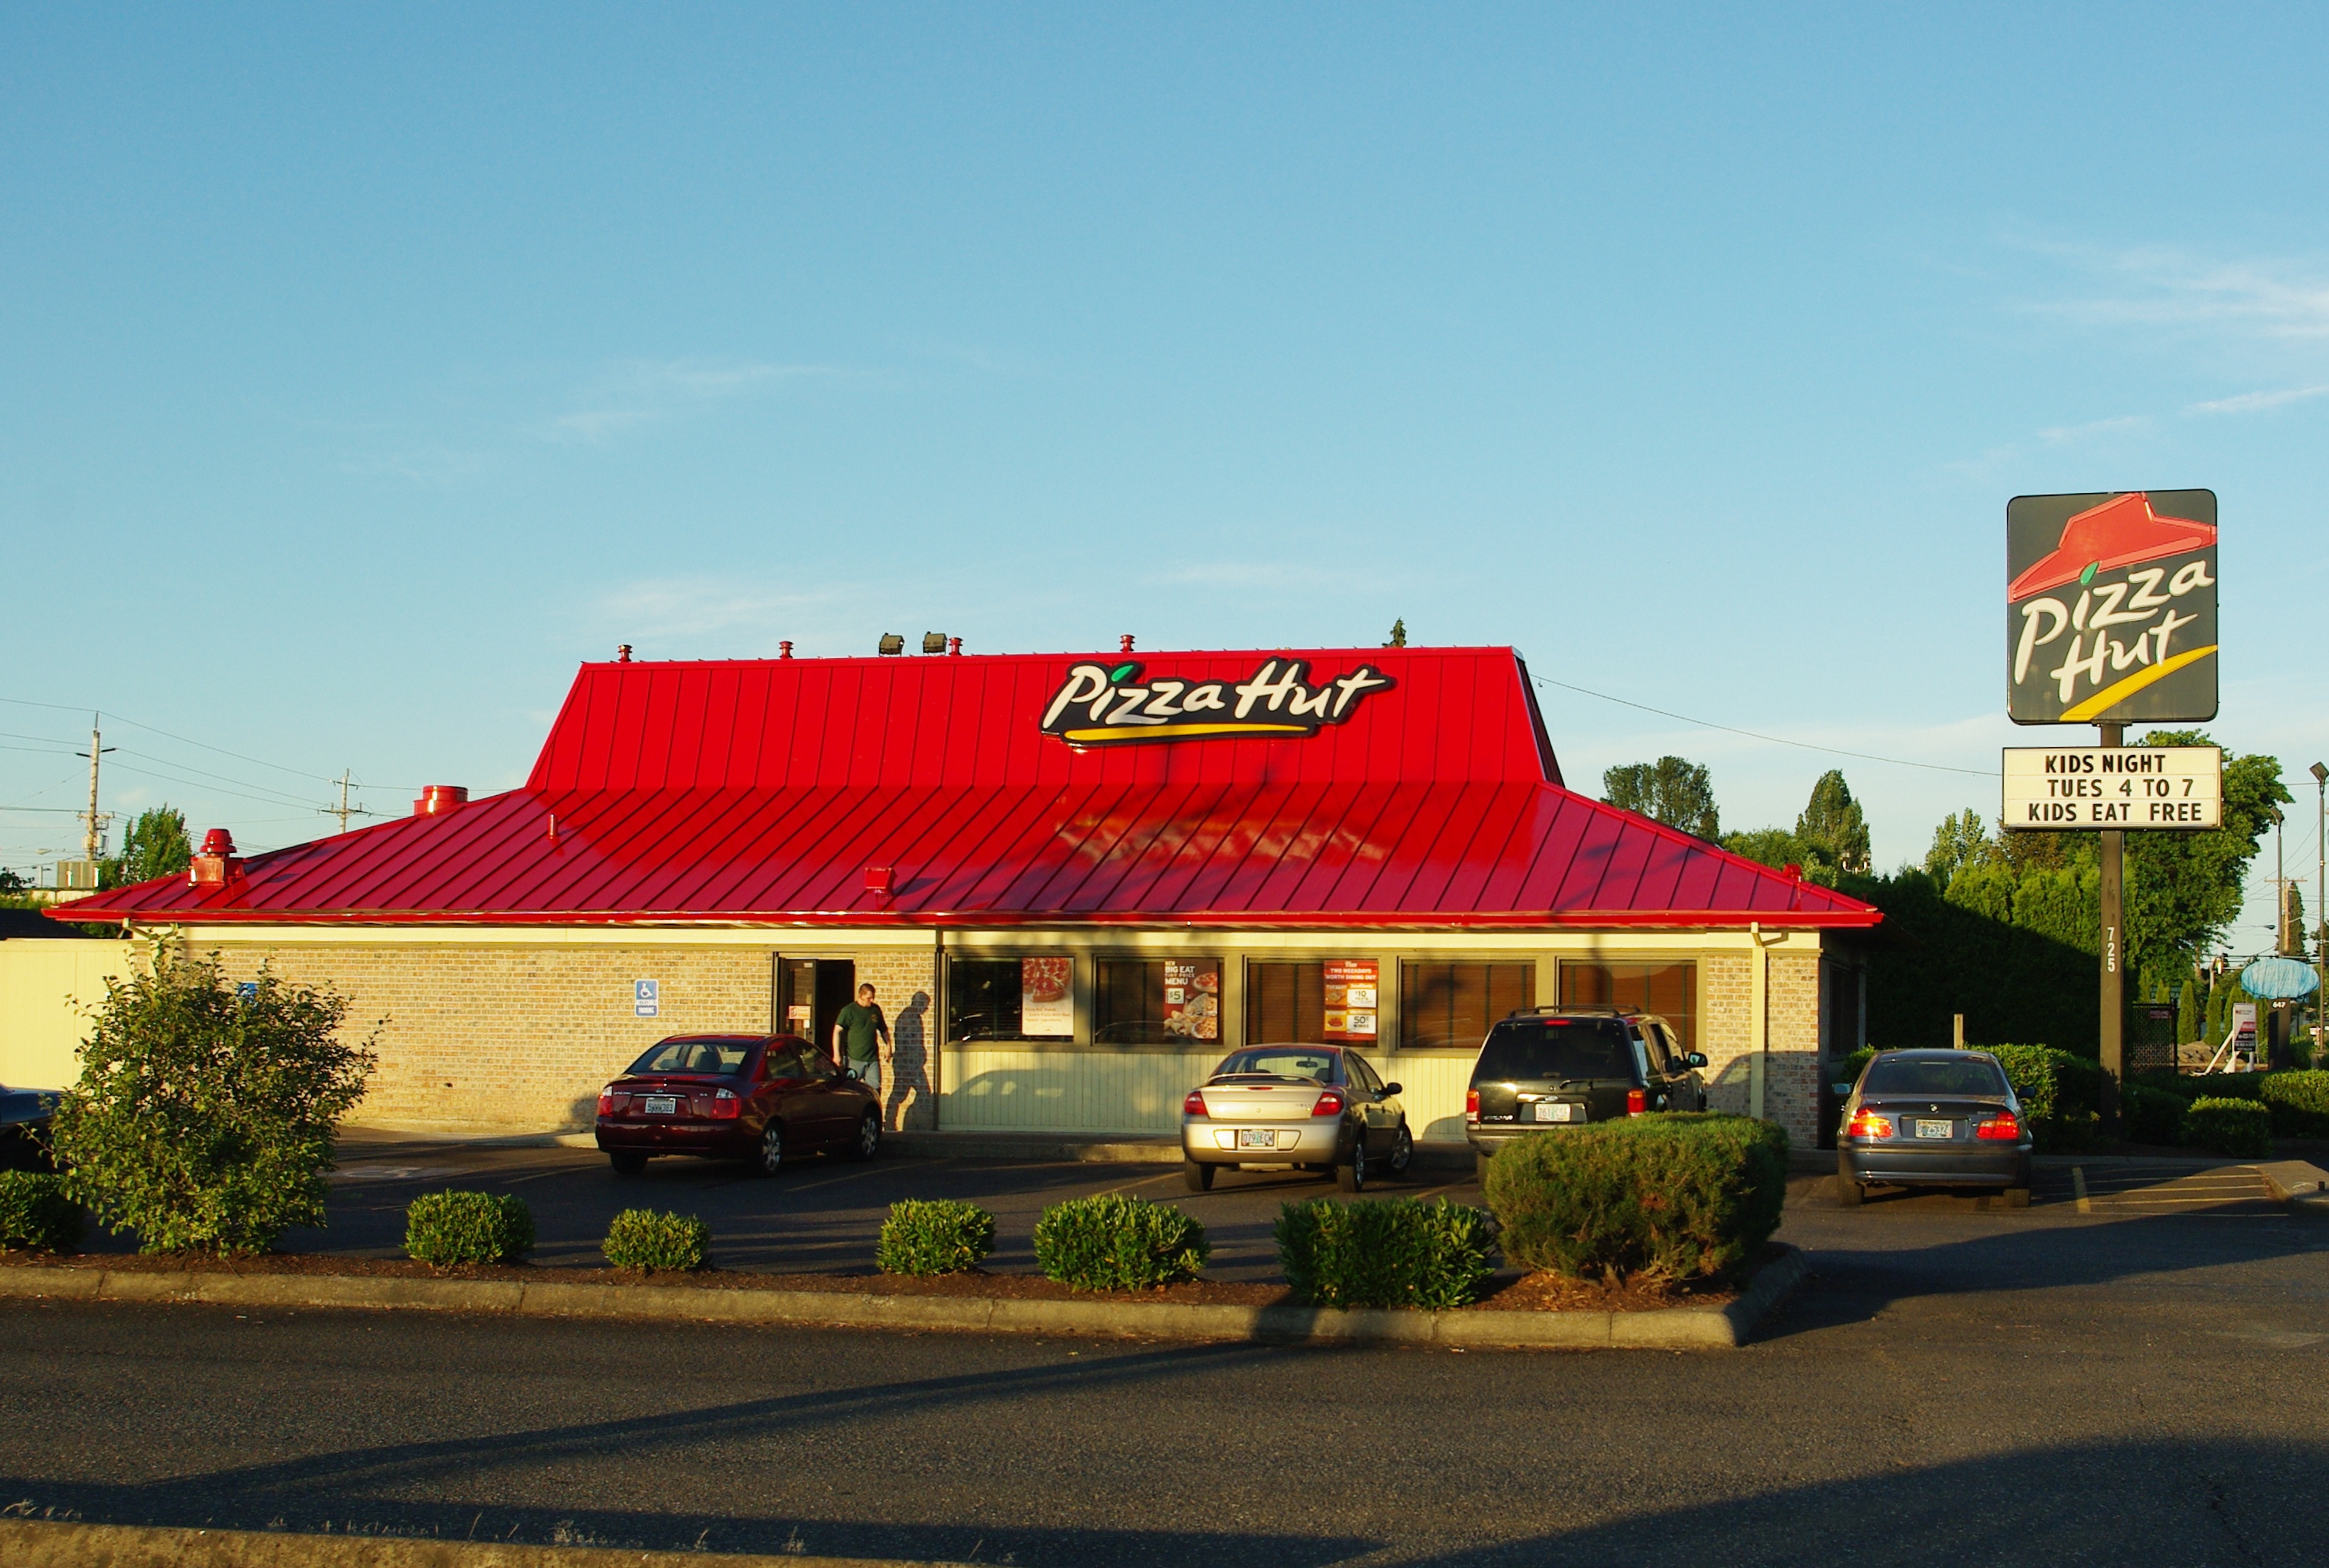 Pizza Hut Parent Stock Gains On Strong Q2 Earnings, Solid Same-Store Sales Growth